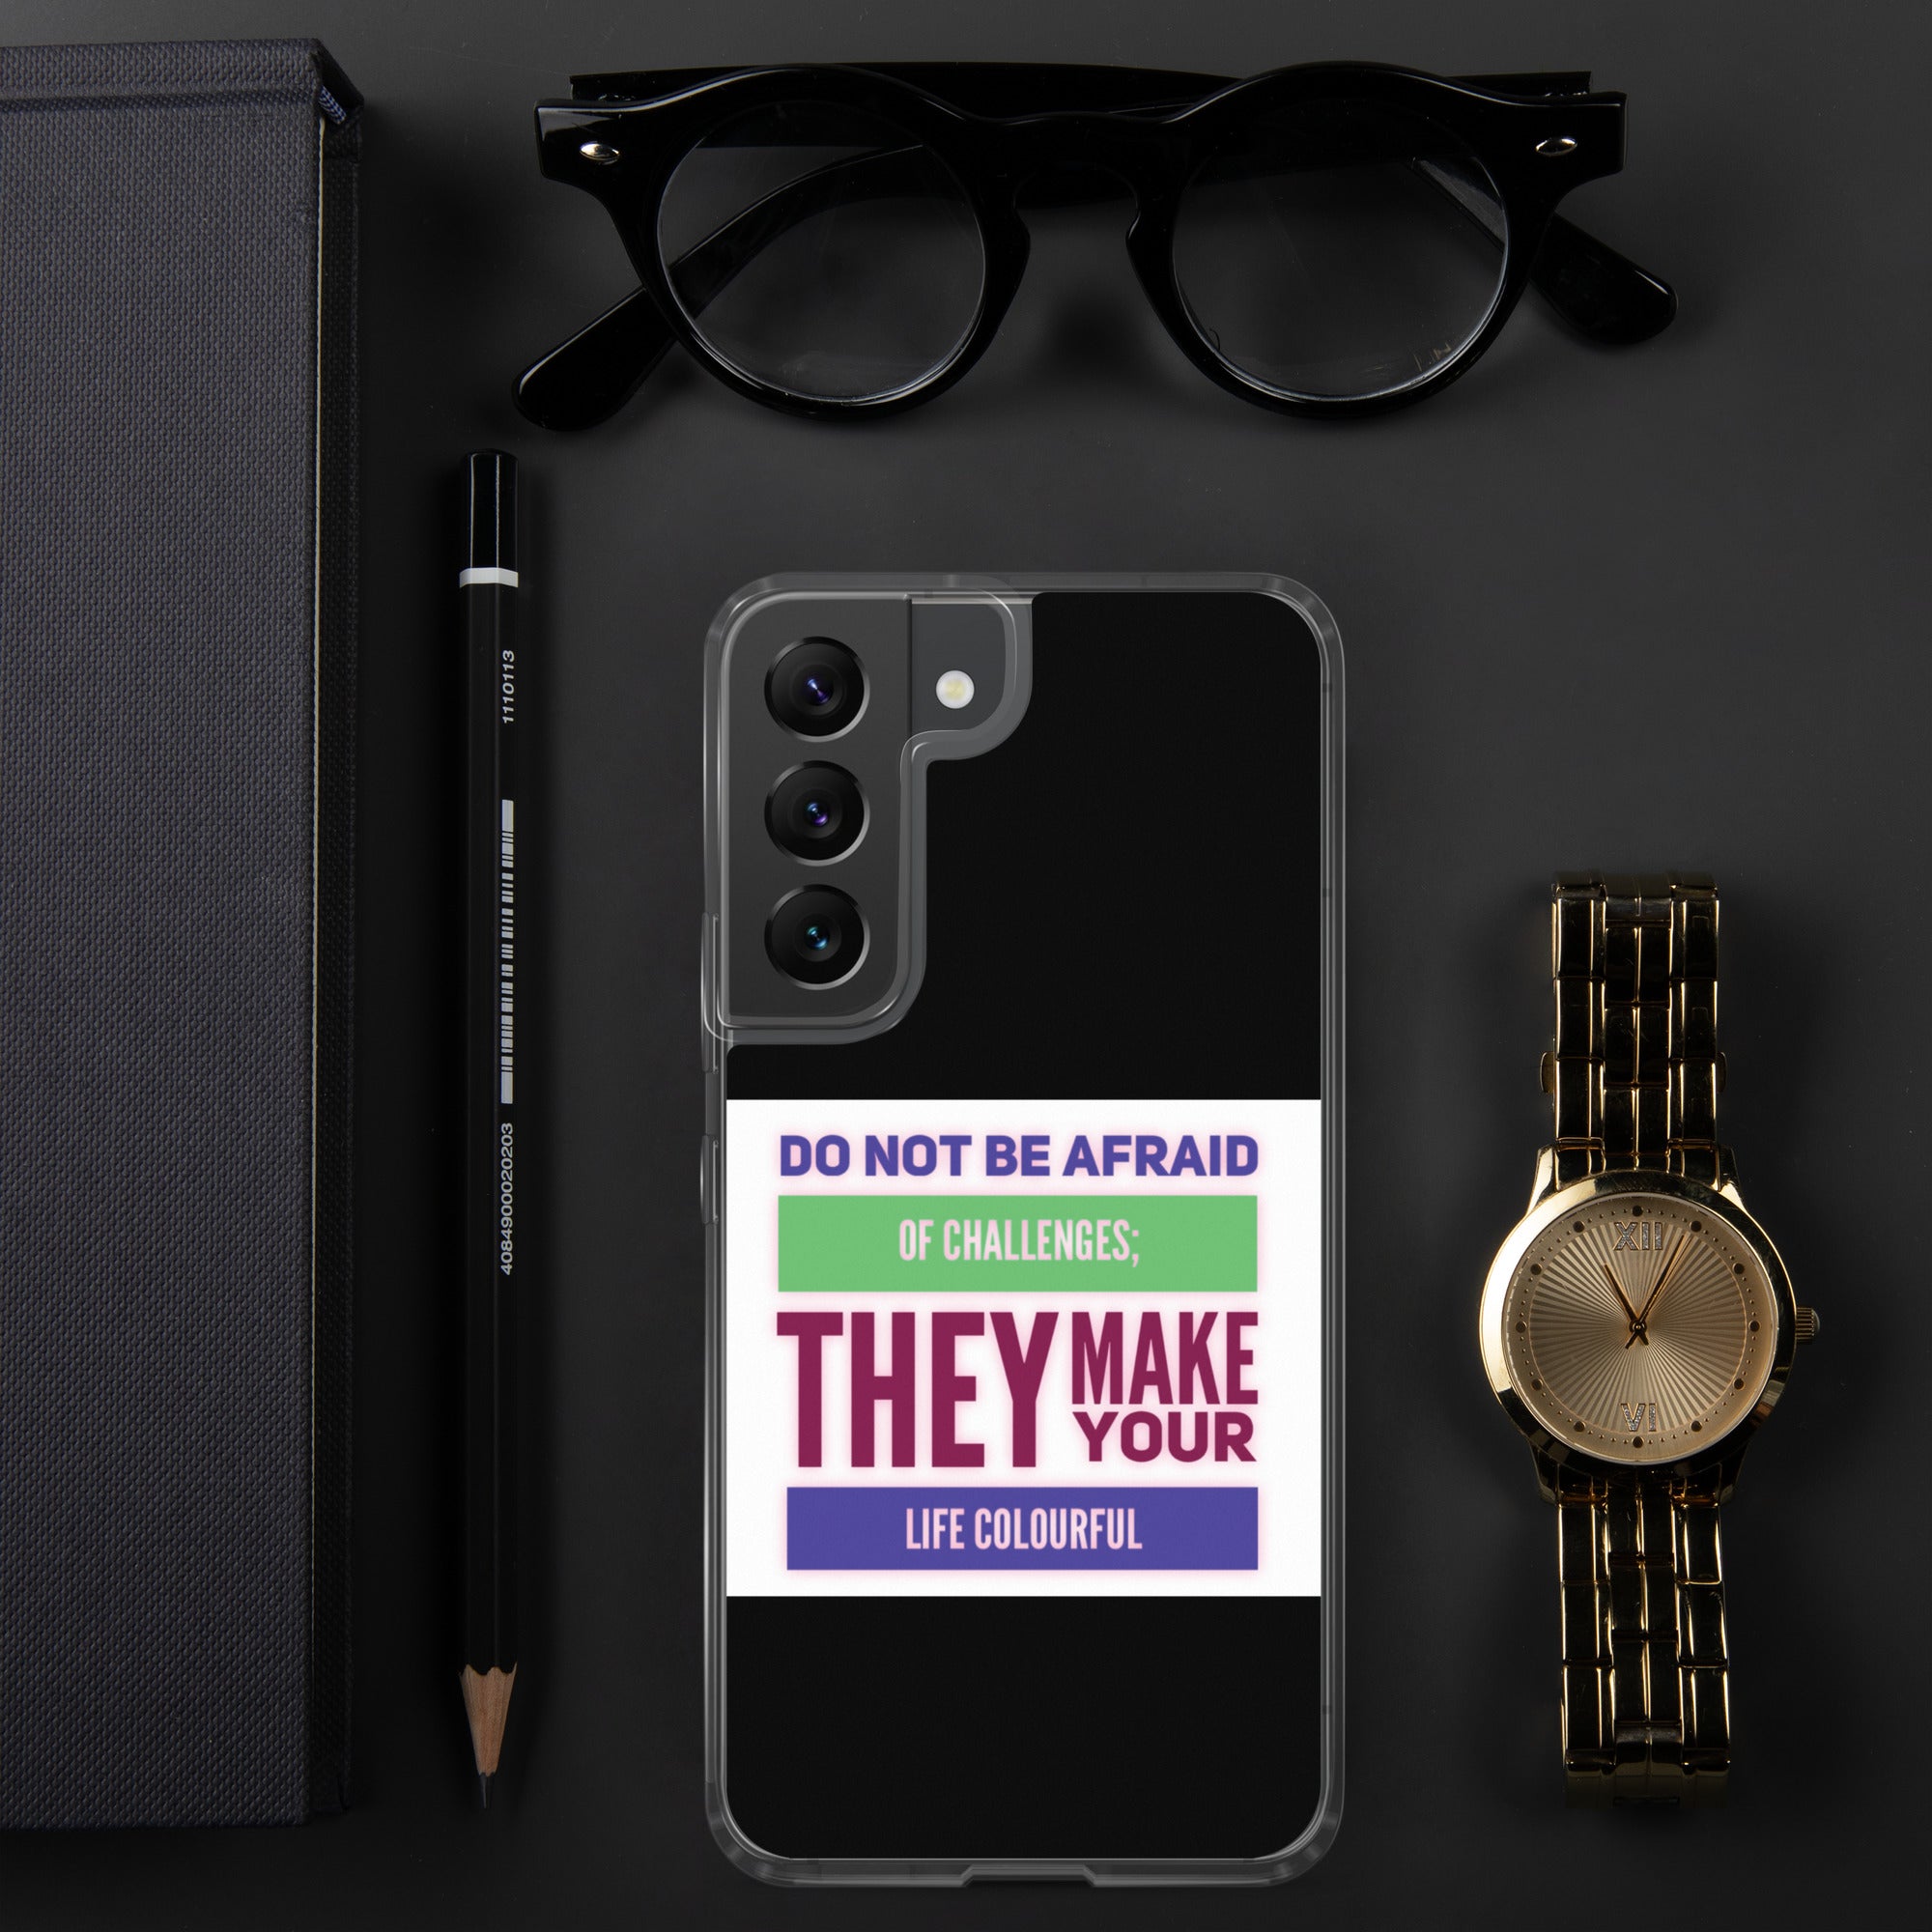 GloWell Designs - Samsung Case - Motivational Quote - Challenges Make Your Life Colourful - GloWell Designs